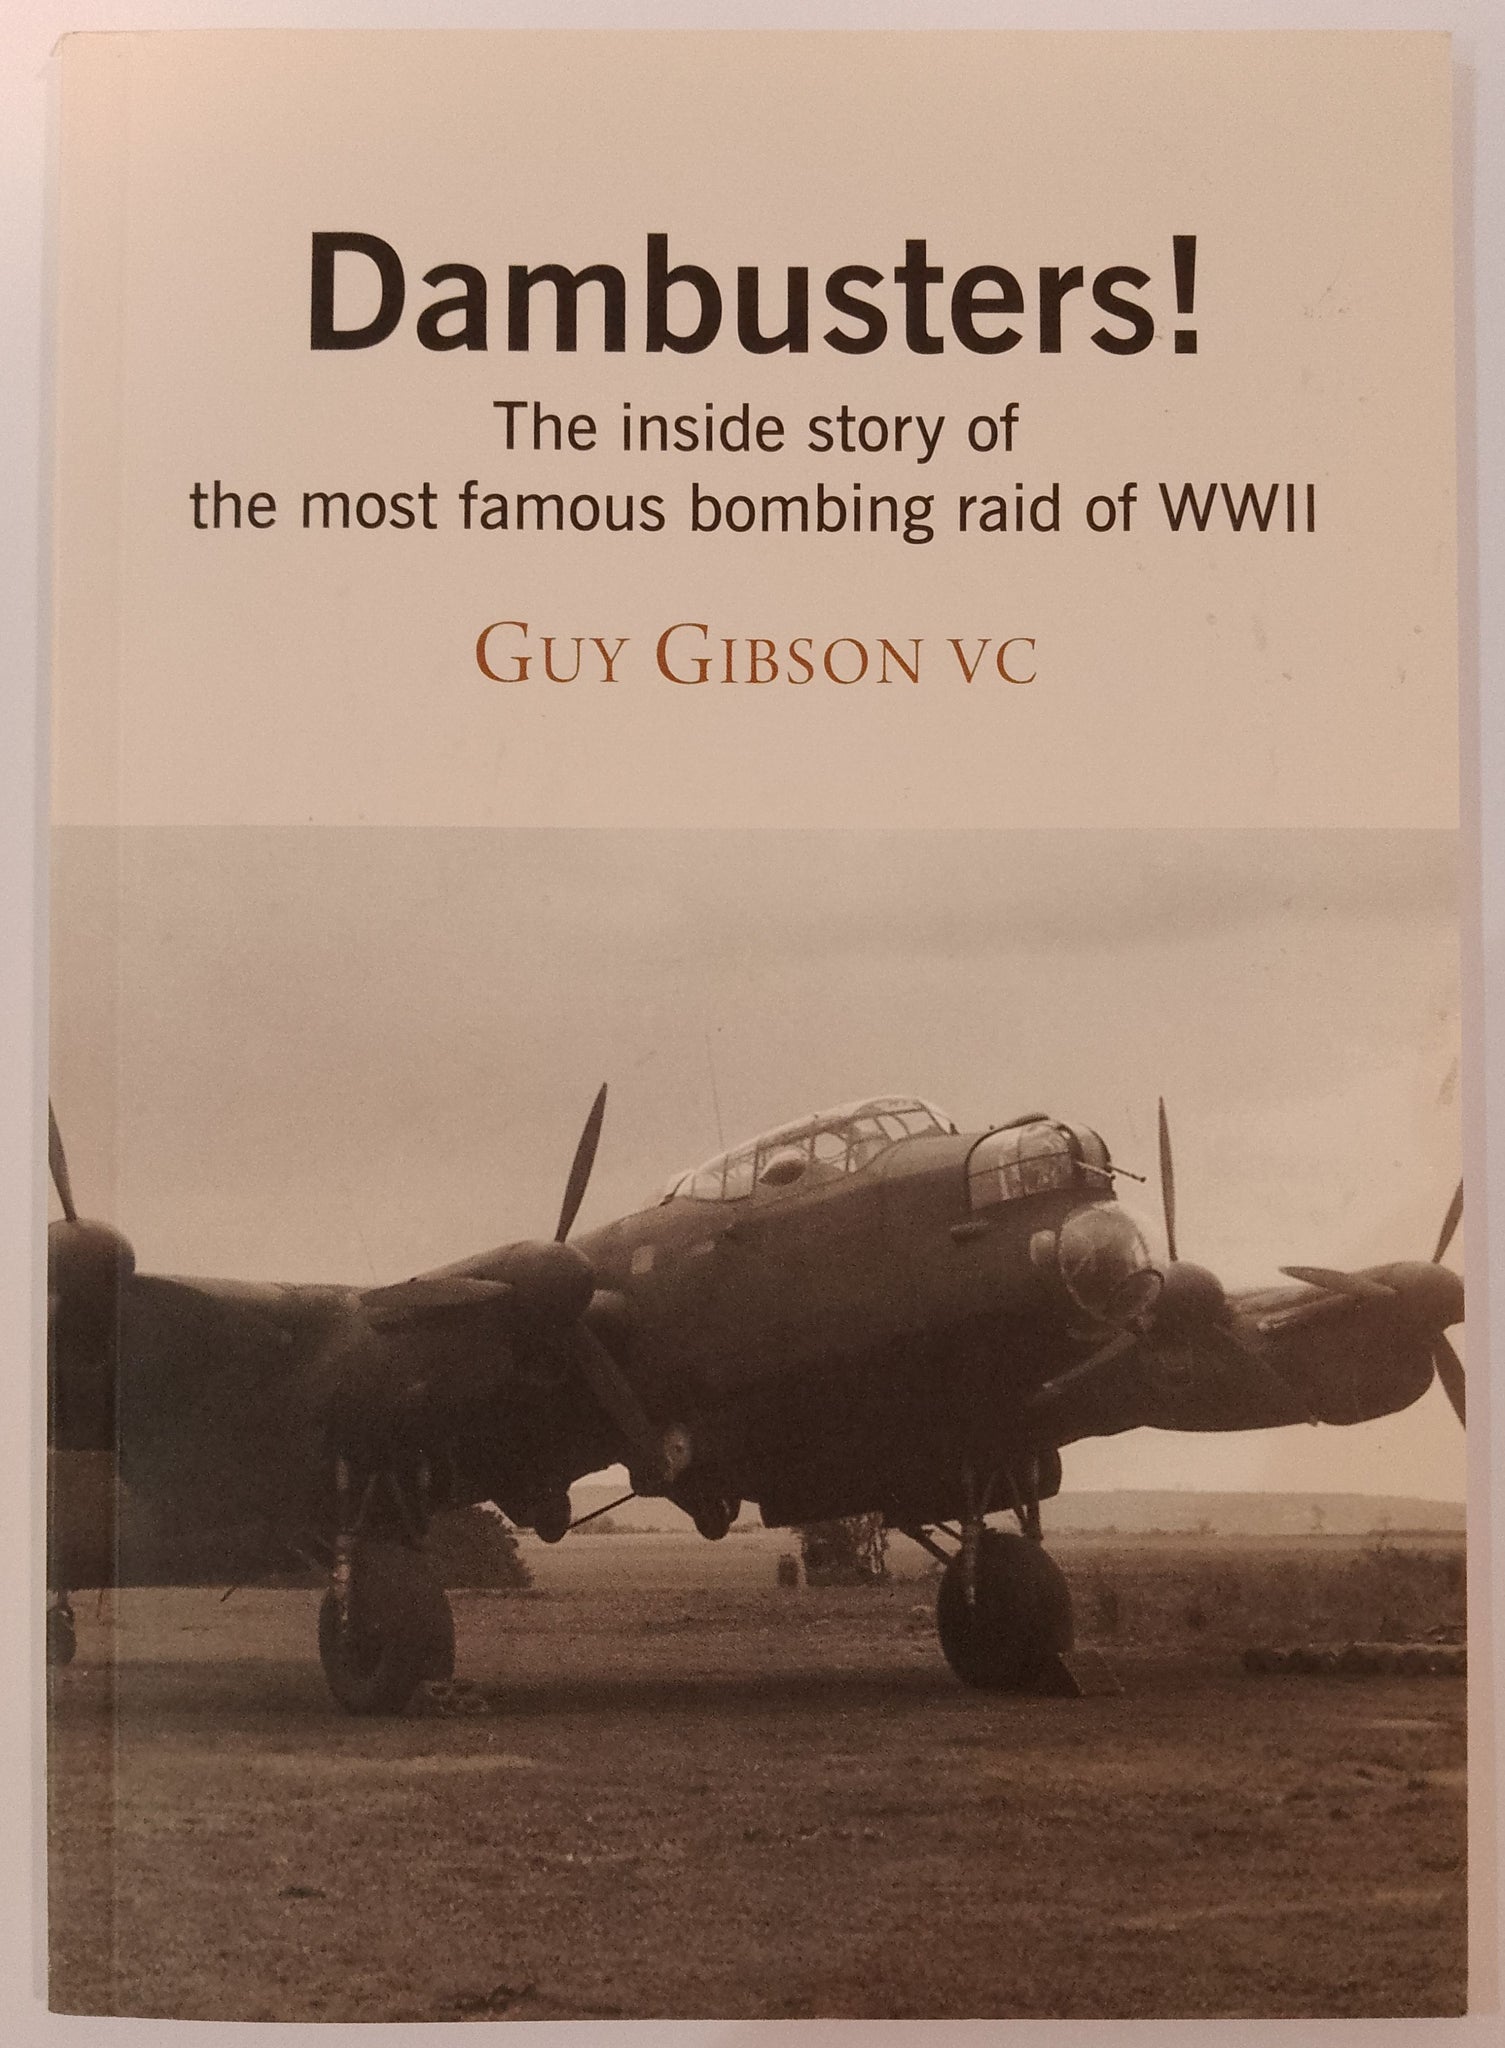 Dambusters! by Guy Gibson